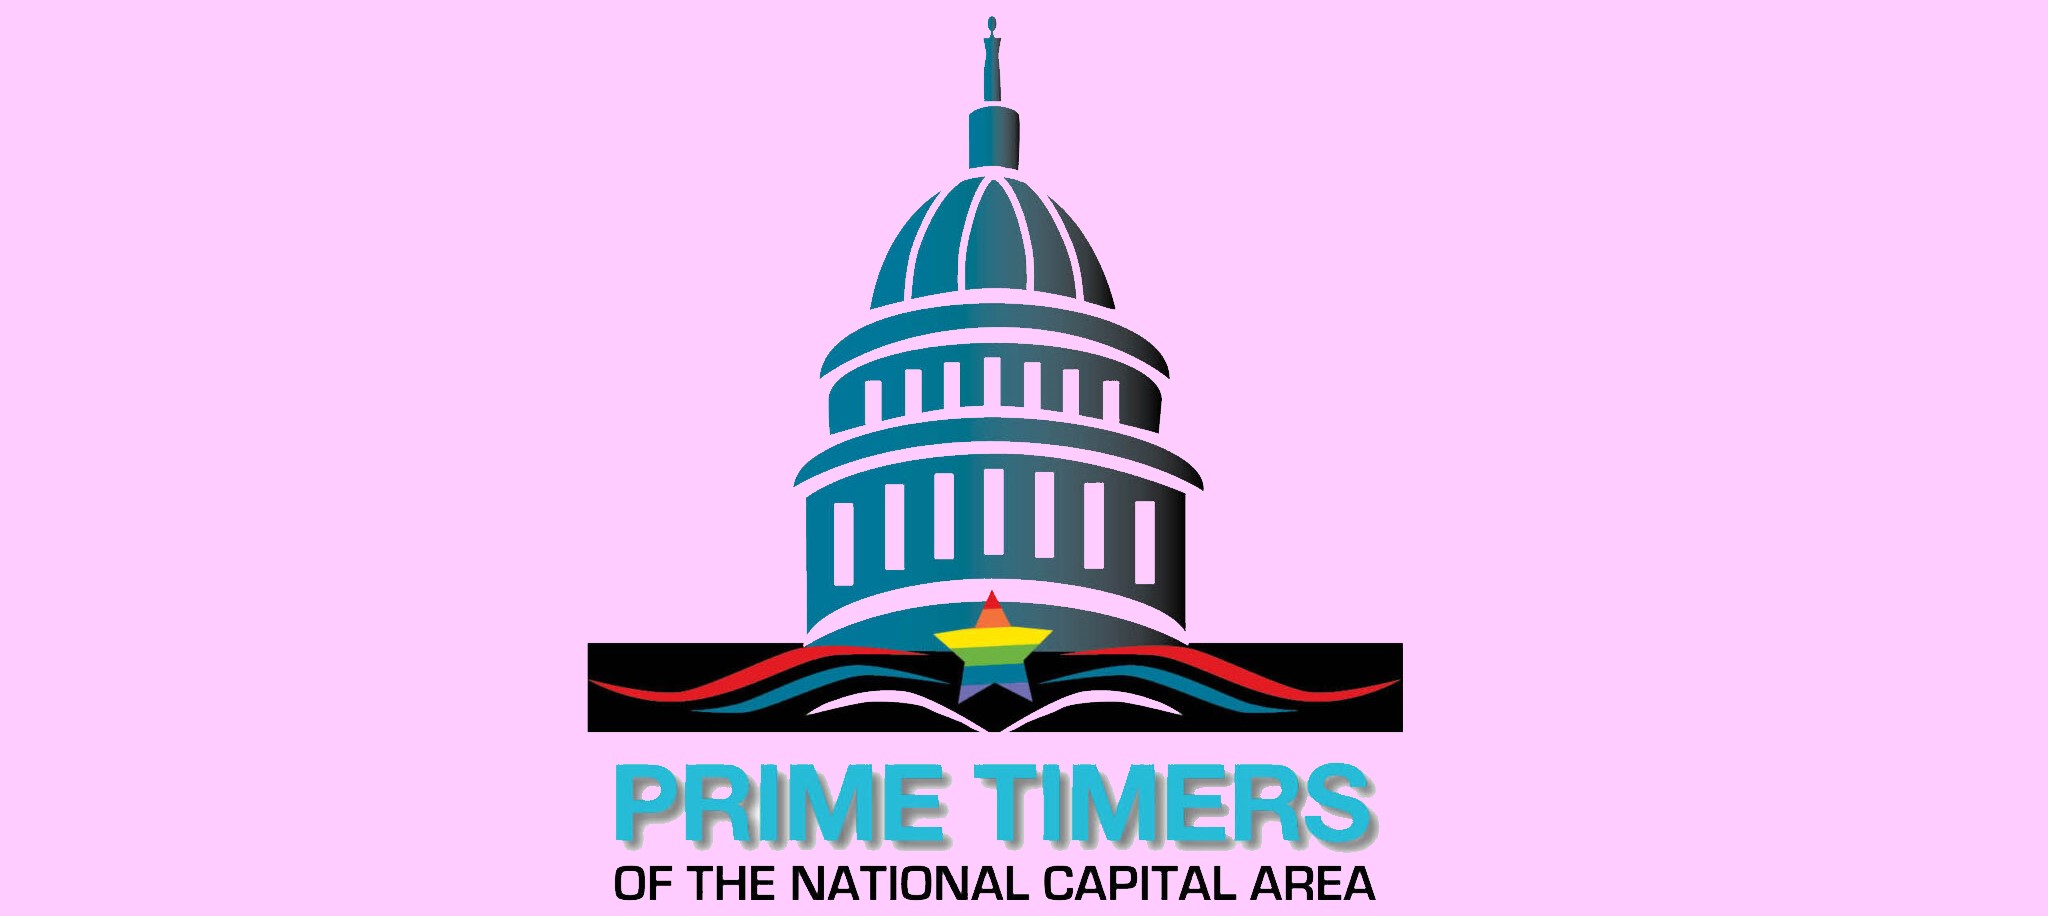 Prime Timers of National Capital Area